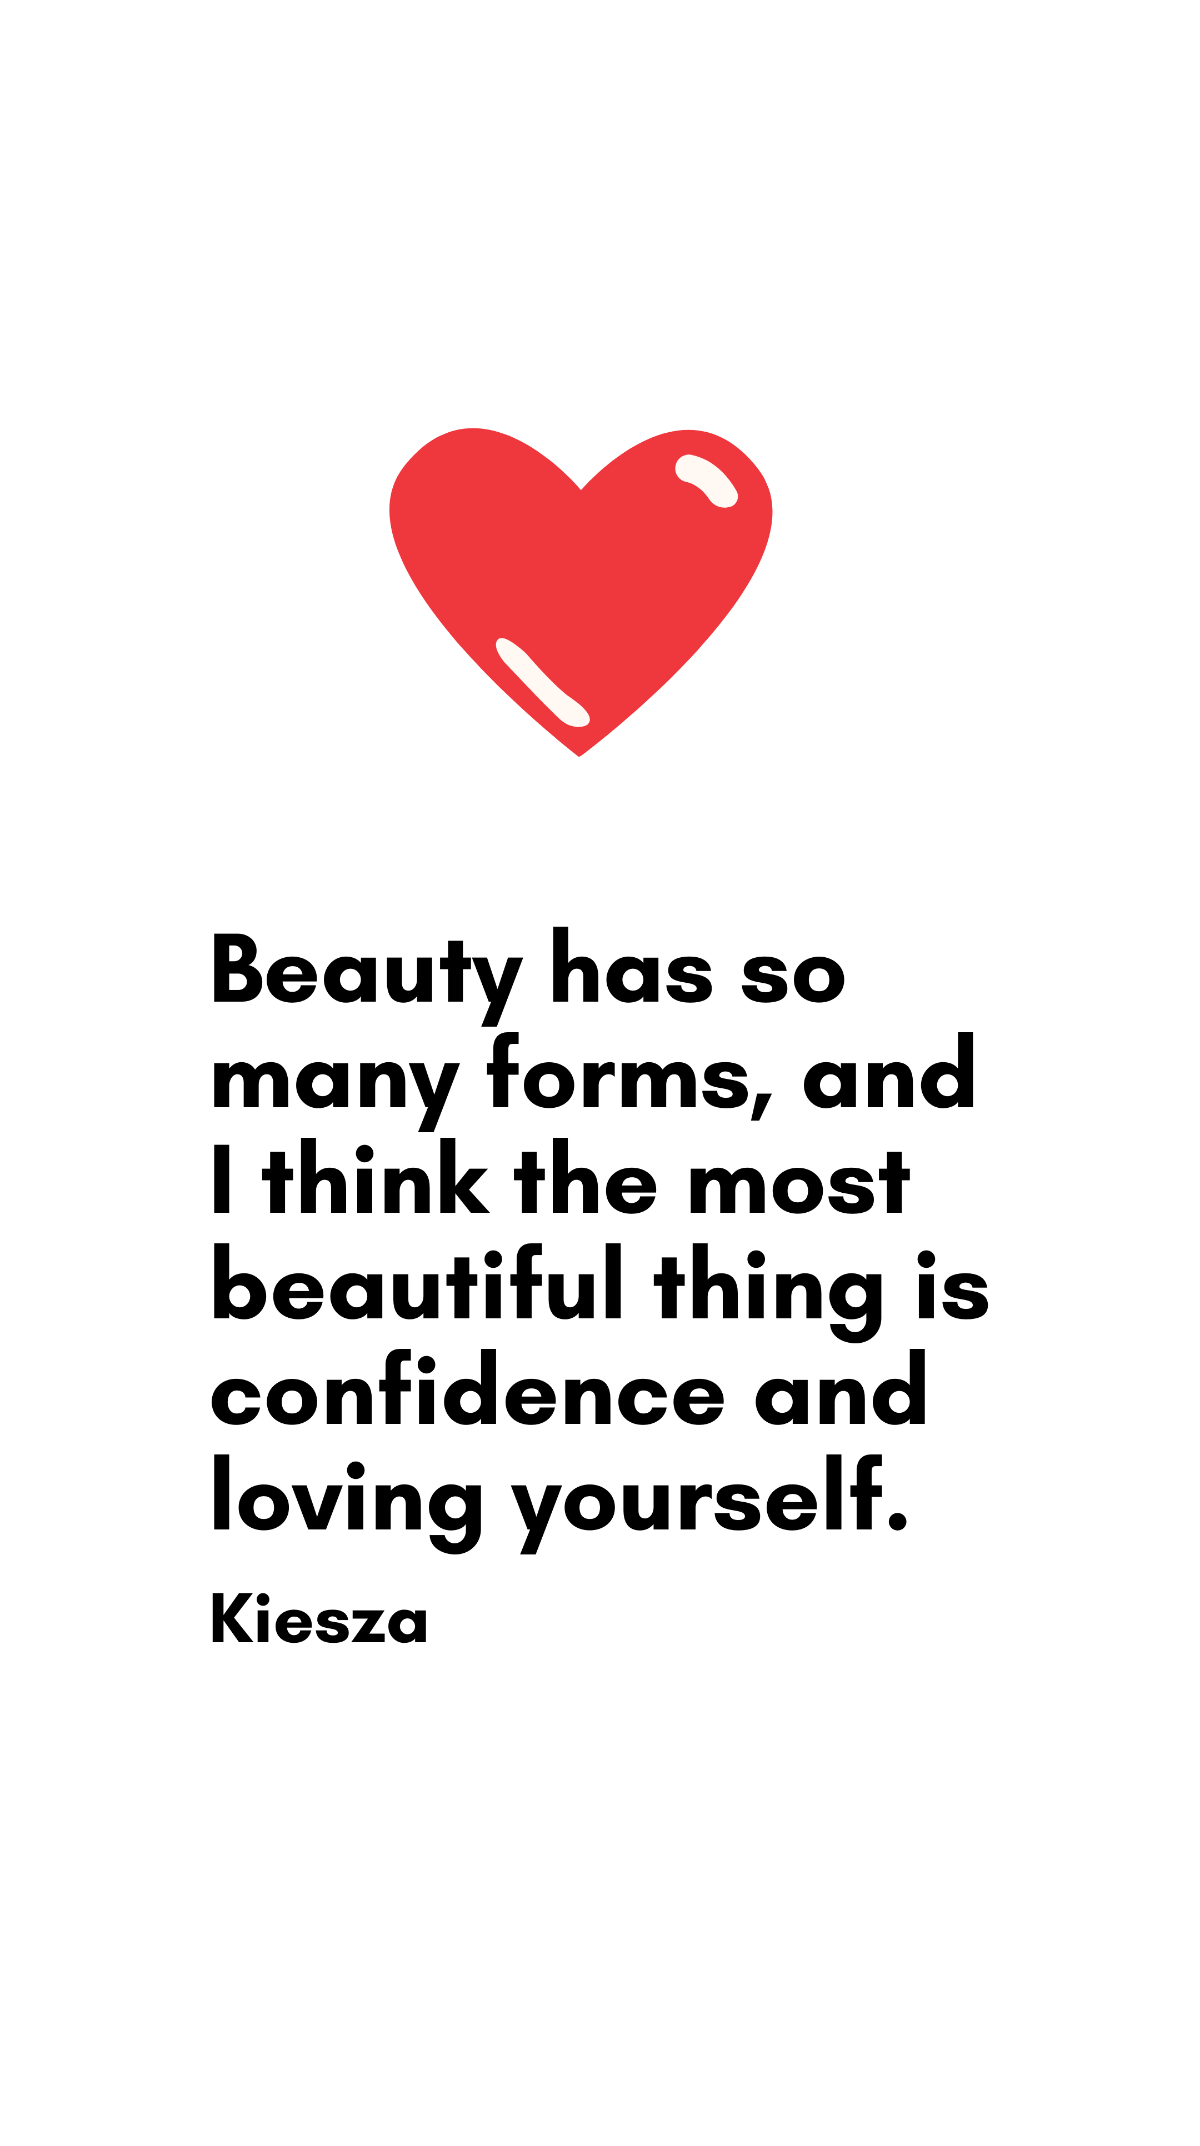 Free Kiesza - Beauty has so many forms, and I think the most beautiful thing is confidence and loving yourself. Template